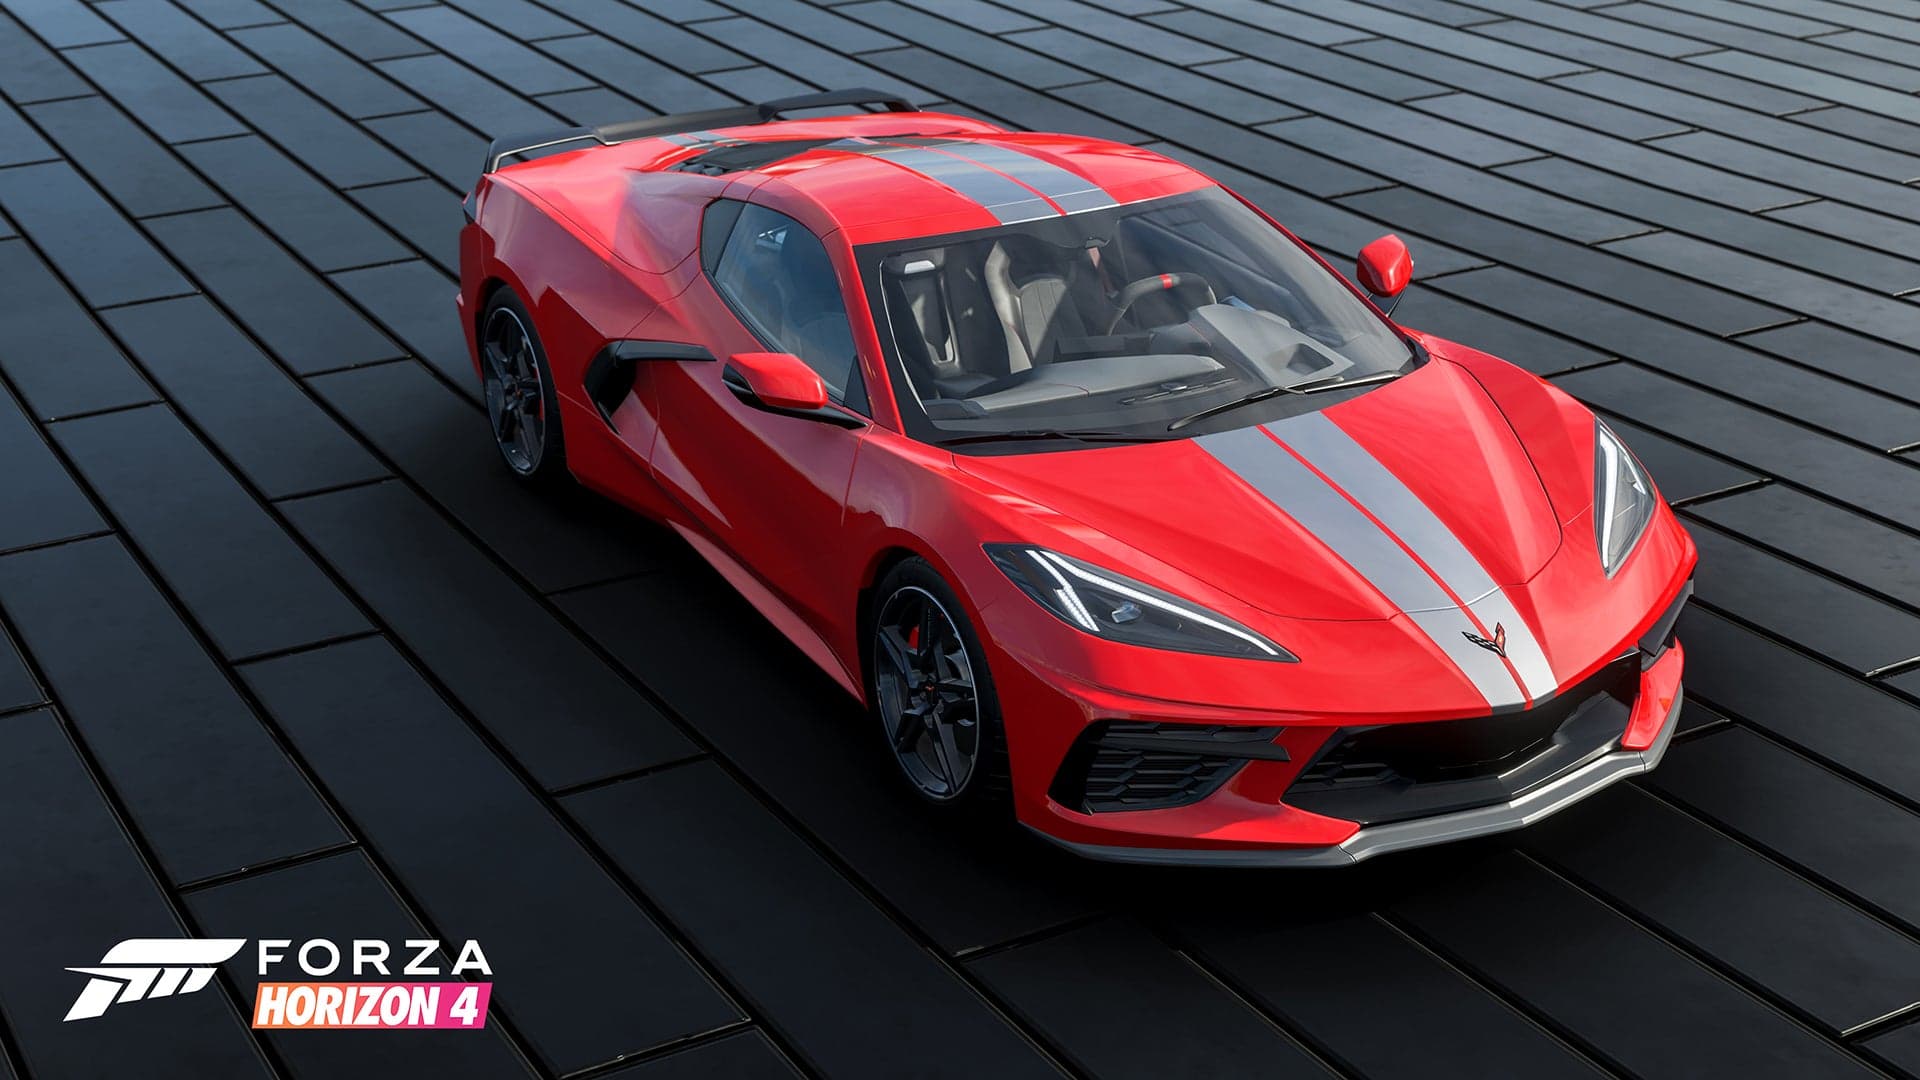 The 2021 Chevrolet Corvette C8 Is Coming to Forza Horizon 4 This Week